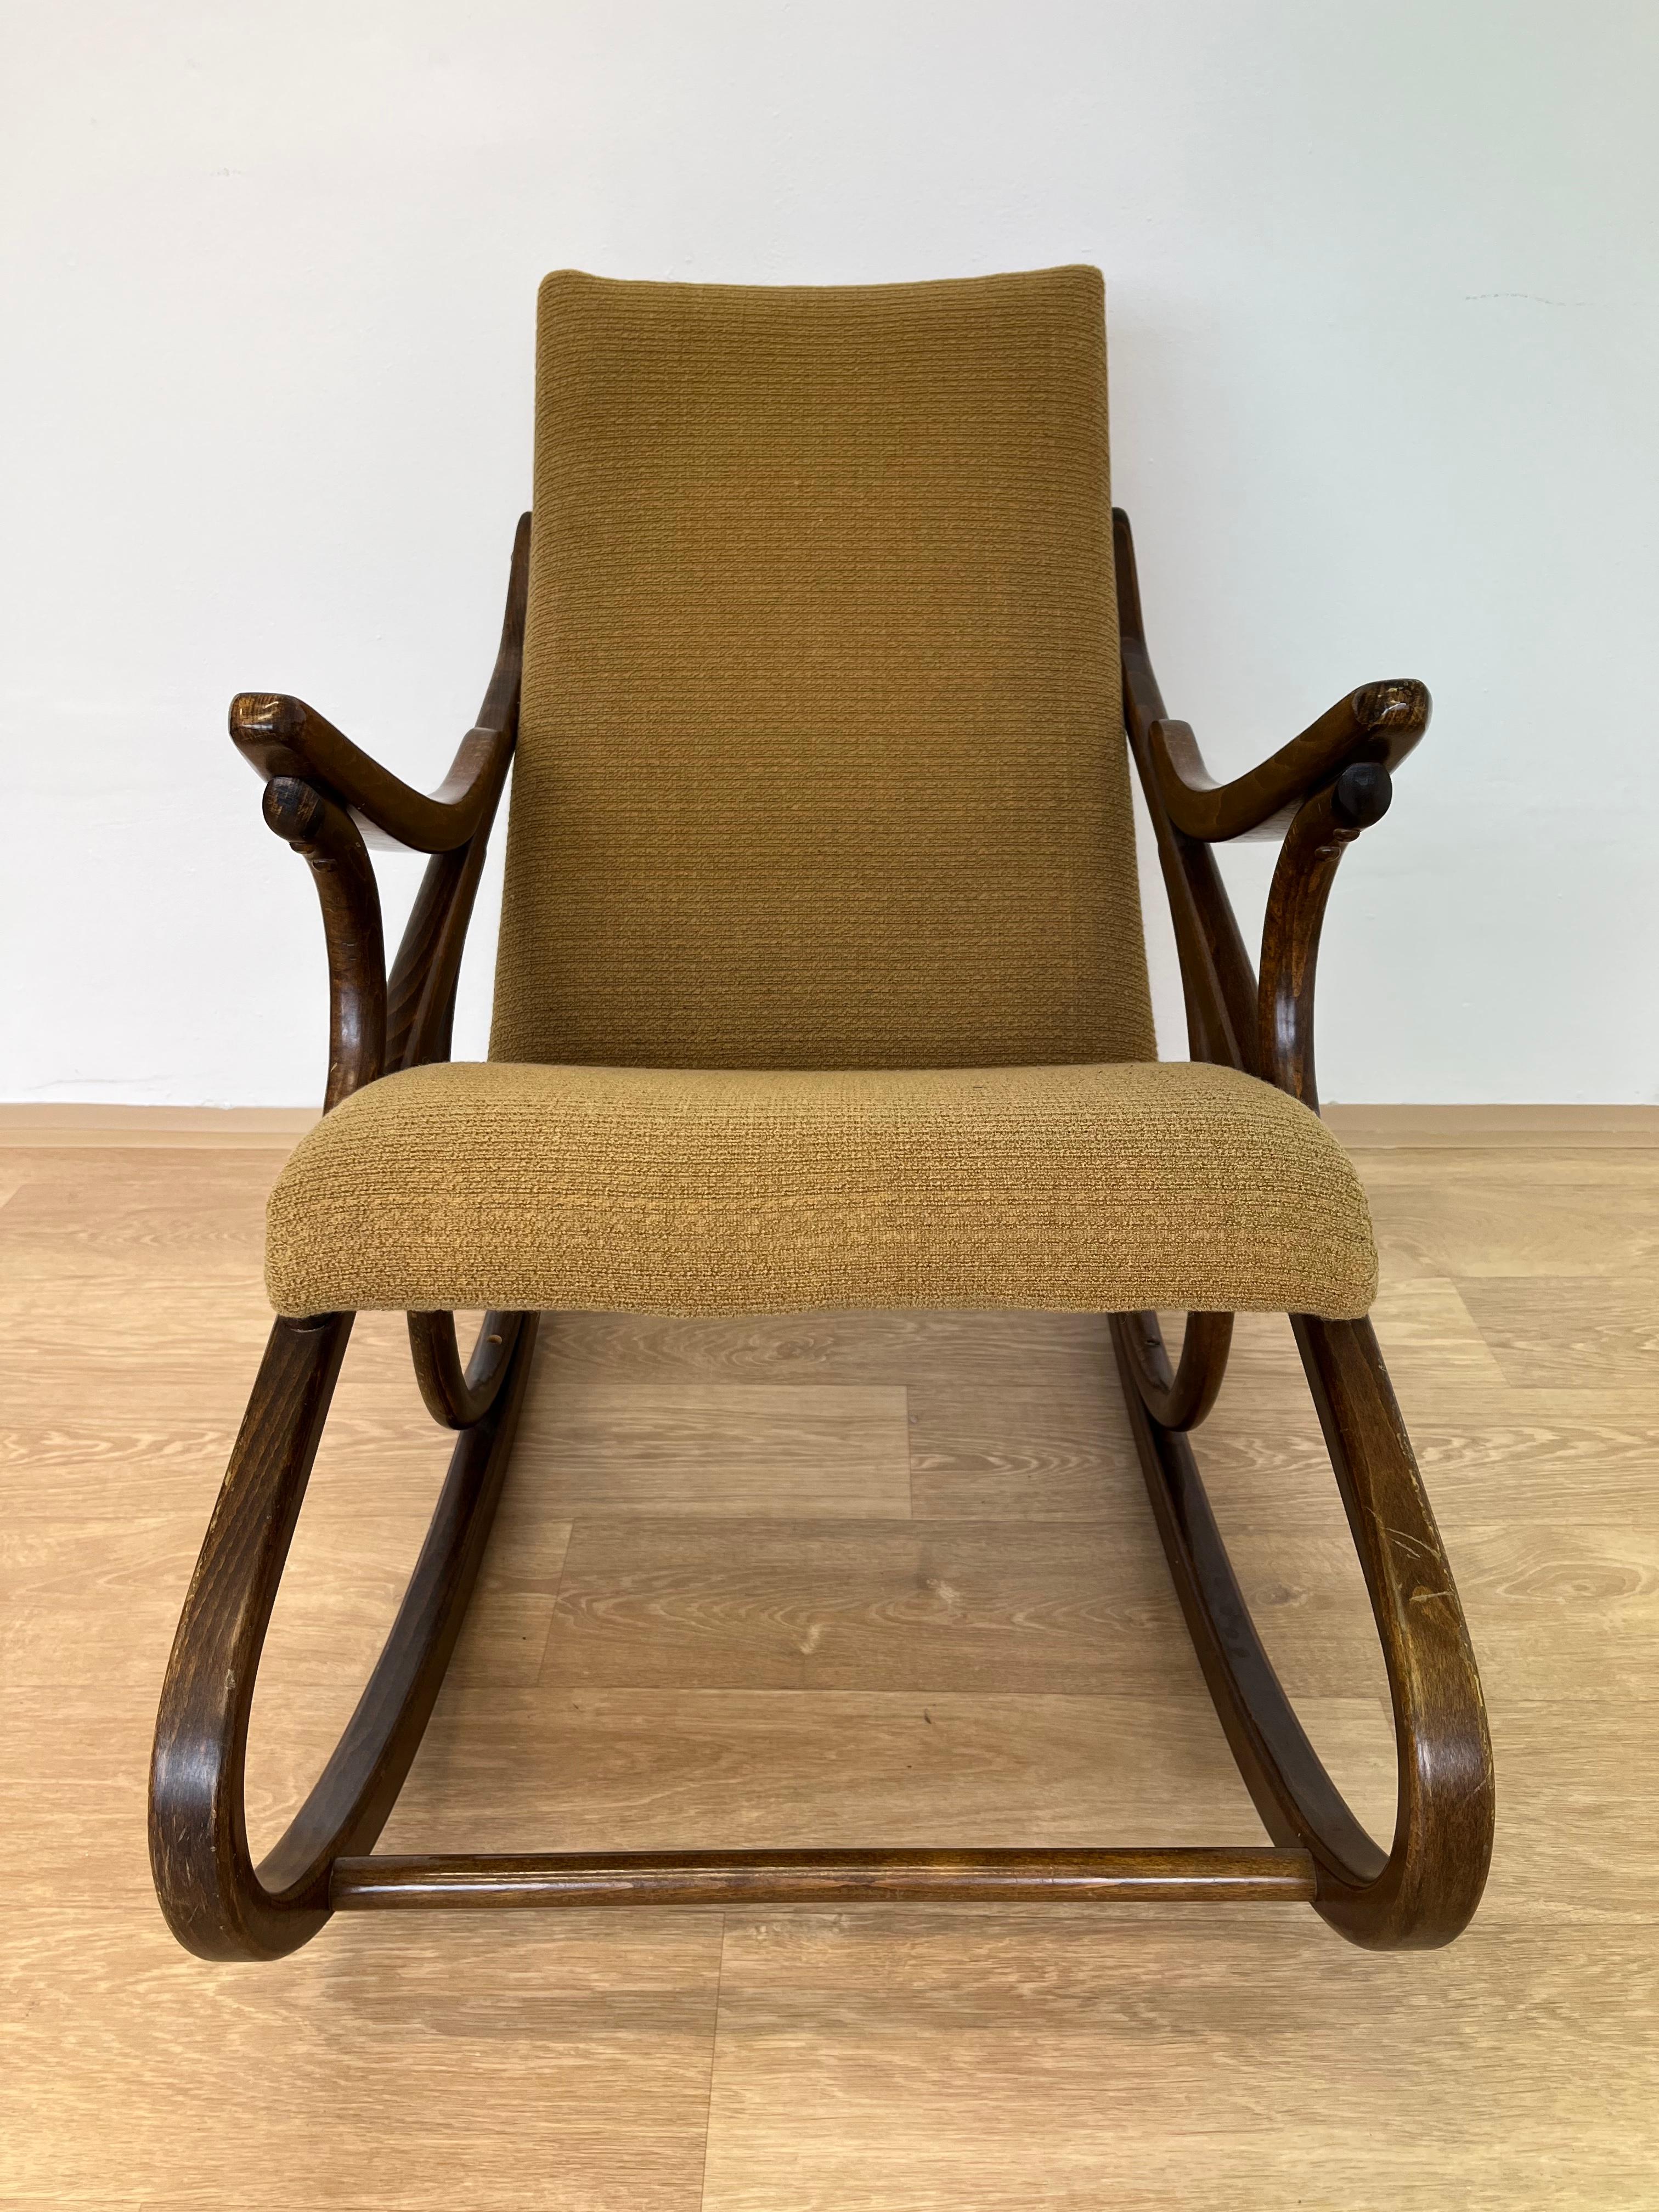 Upholstery Midcentury Design Rocking Chair by TON / Expo, 1958 For Sale